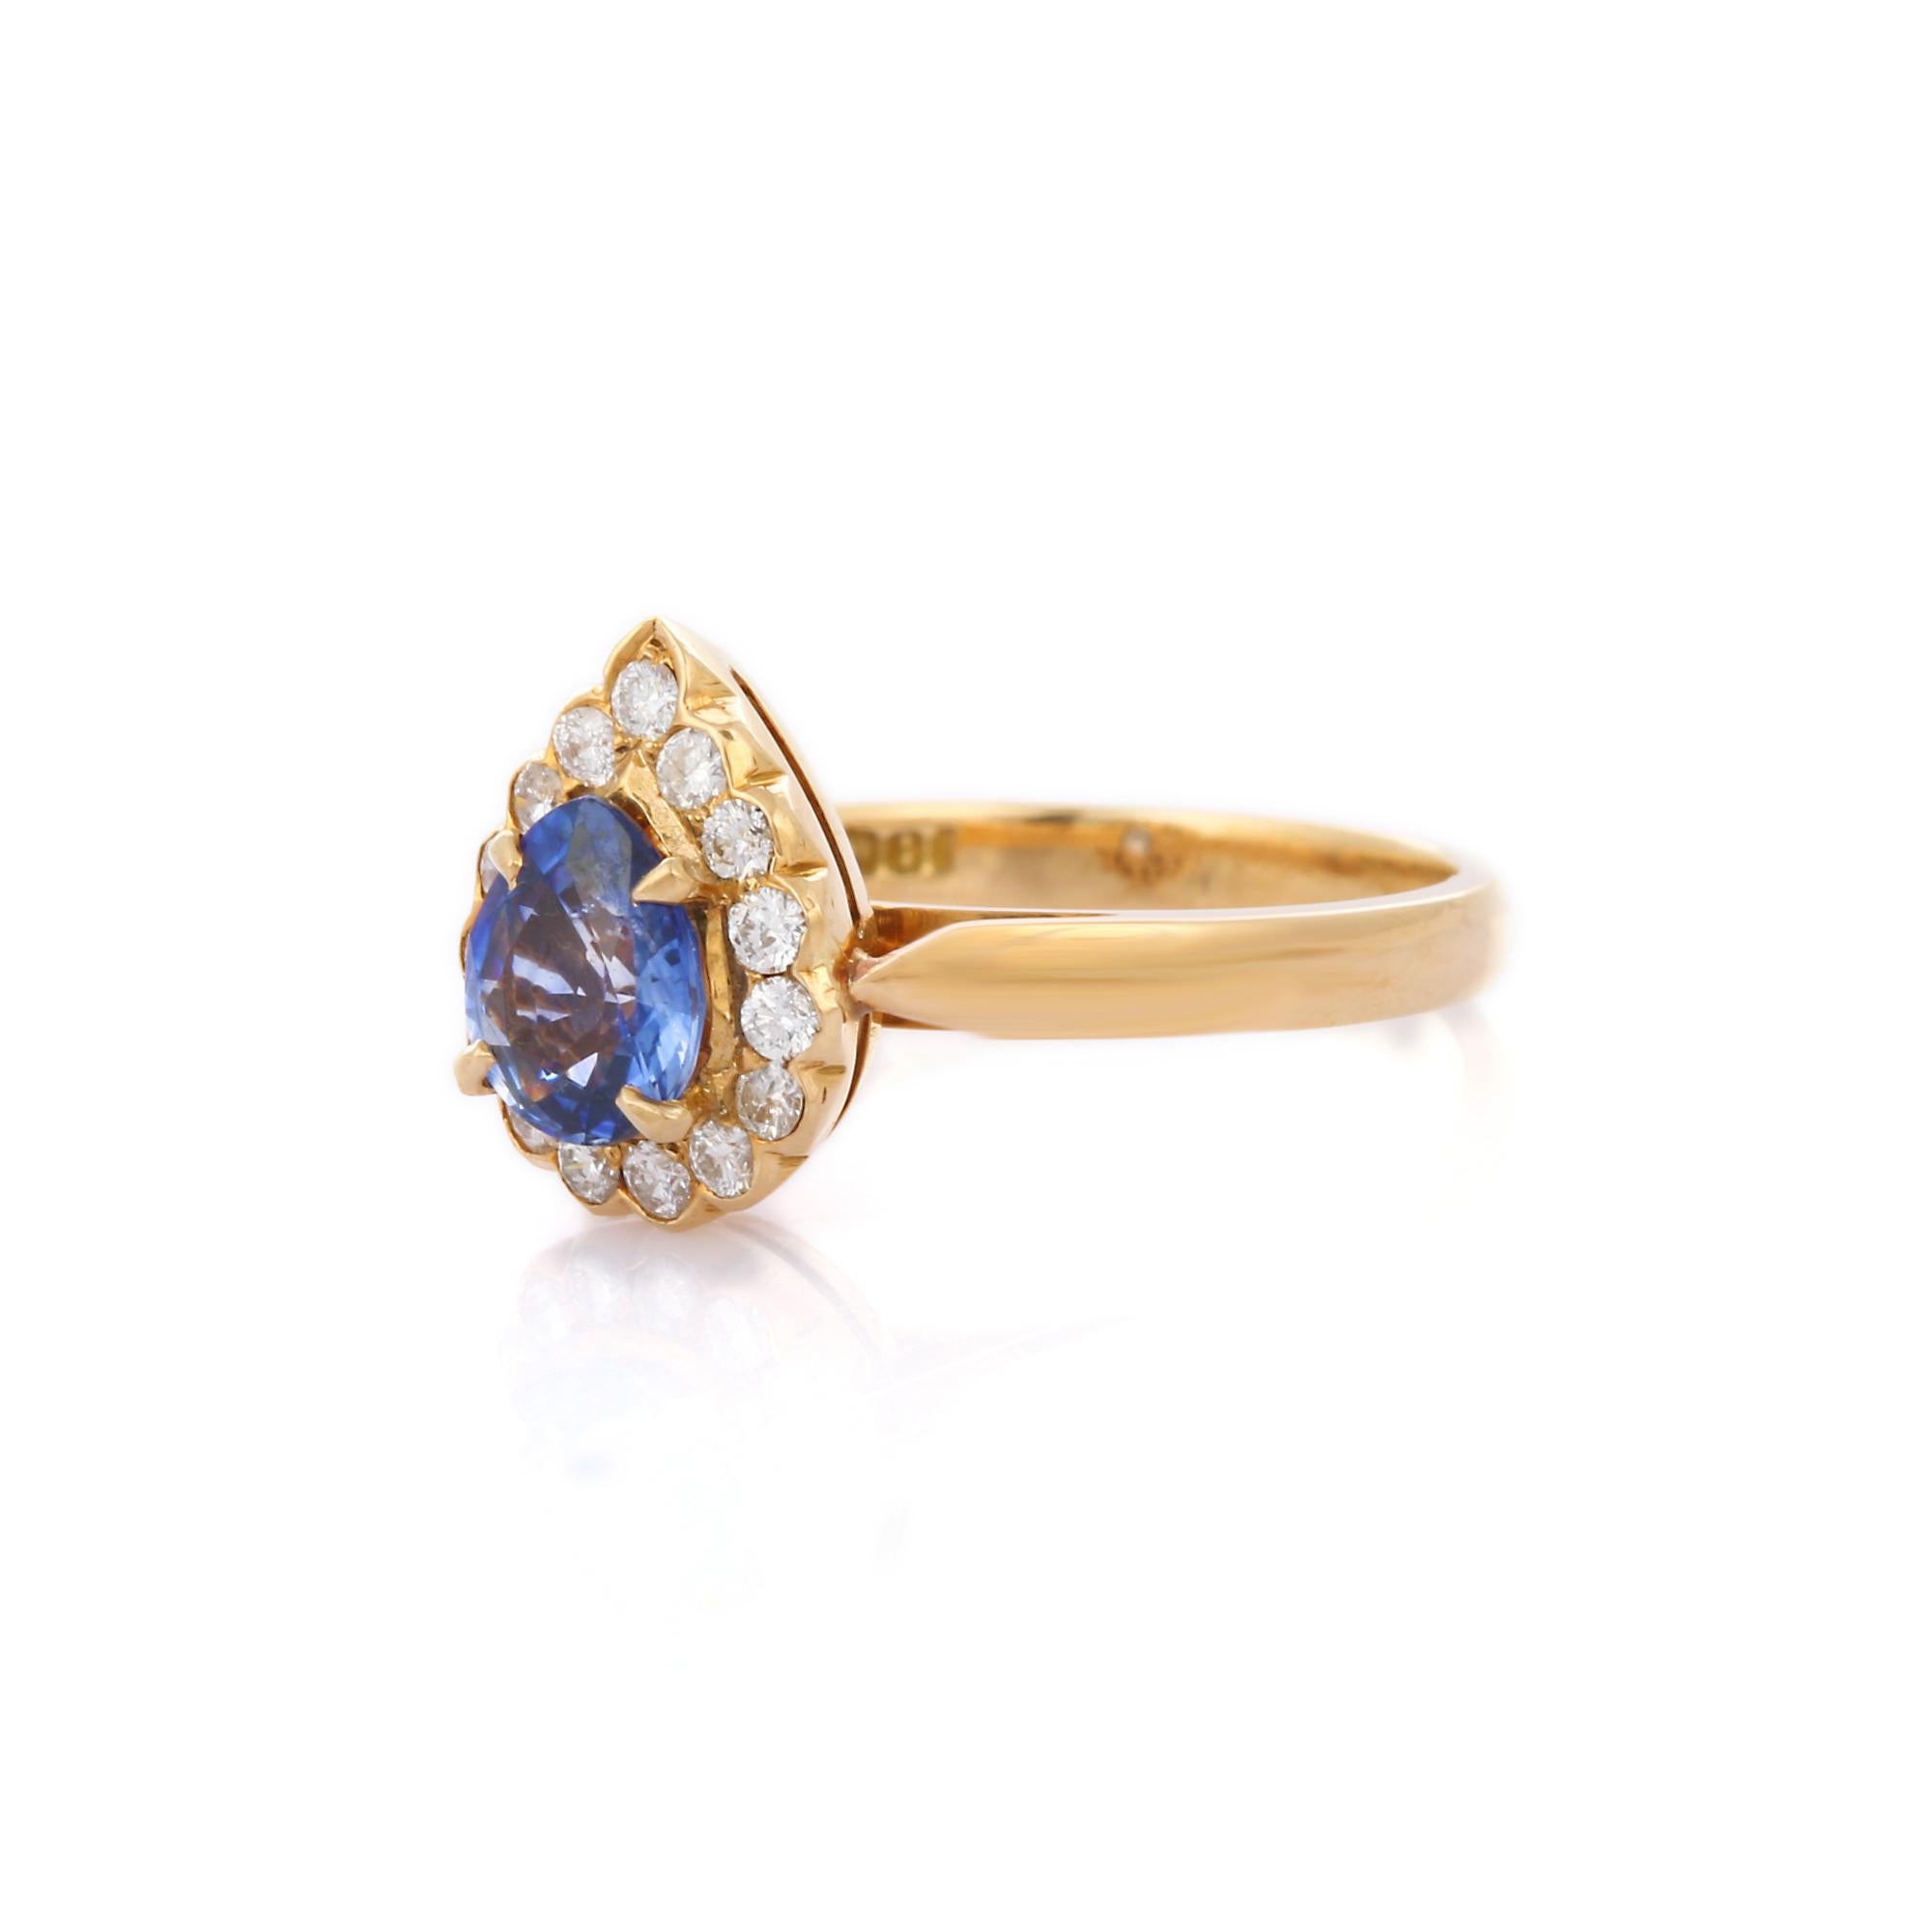 For Sale:  Pear Cut Blue Sapphire Ringed with Diamonds Engagement Ring in 18K Yellow Gold 3